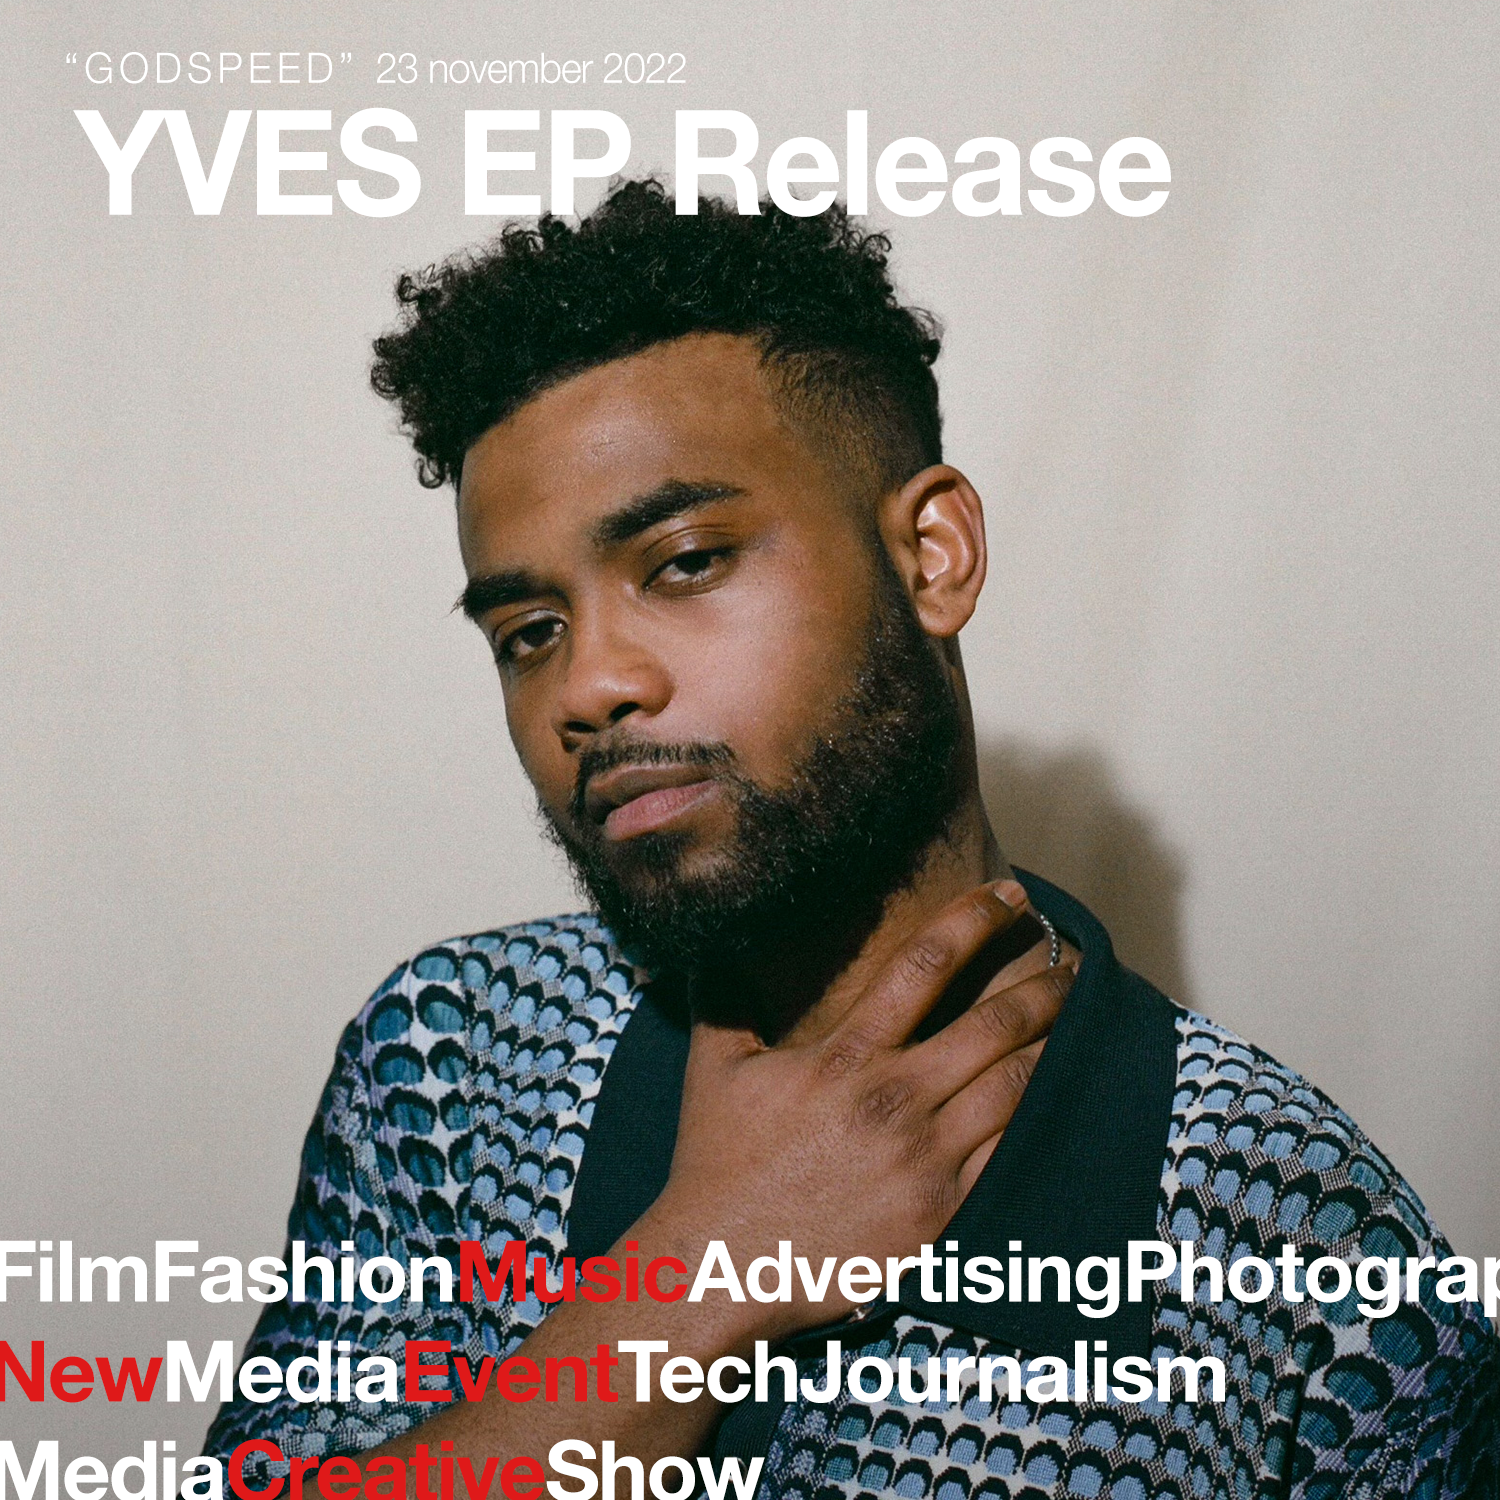 YVES EP Release